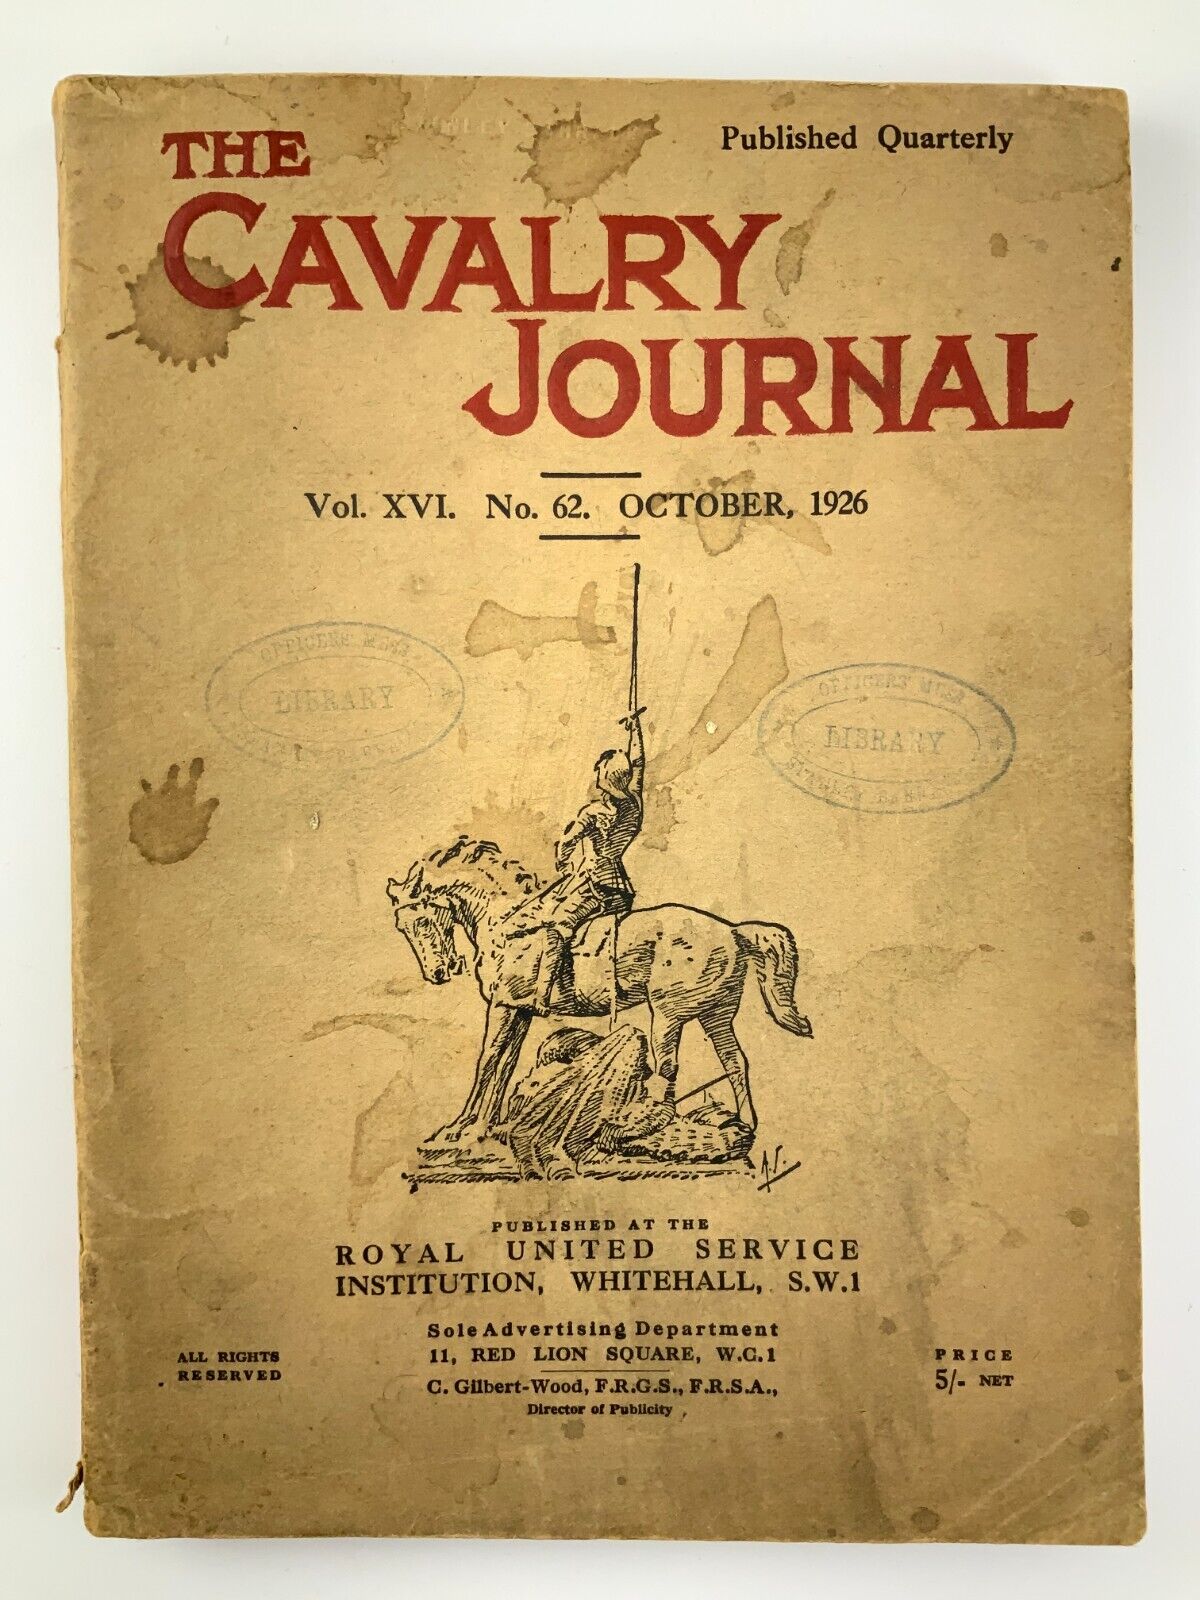 Cavalry Journal Vol XVI No 62 October 1926 Royal United Service Institute BB730